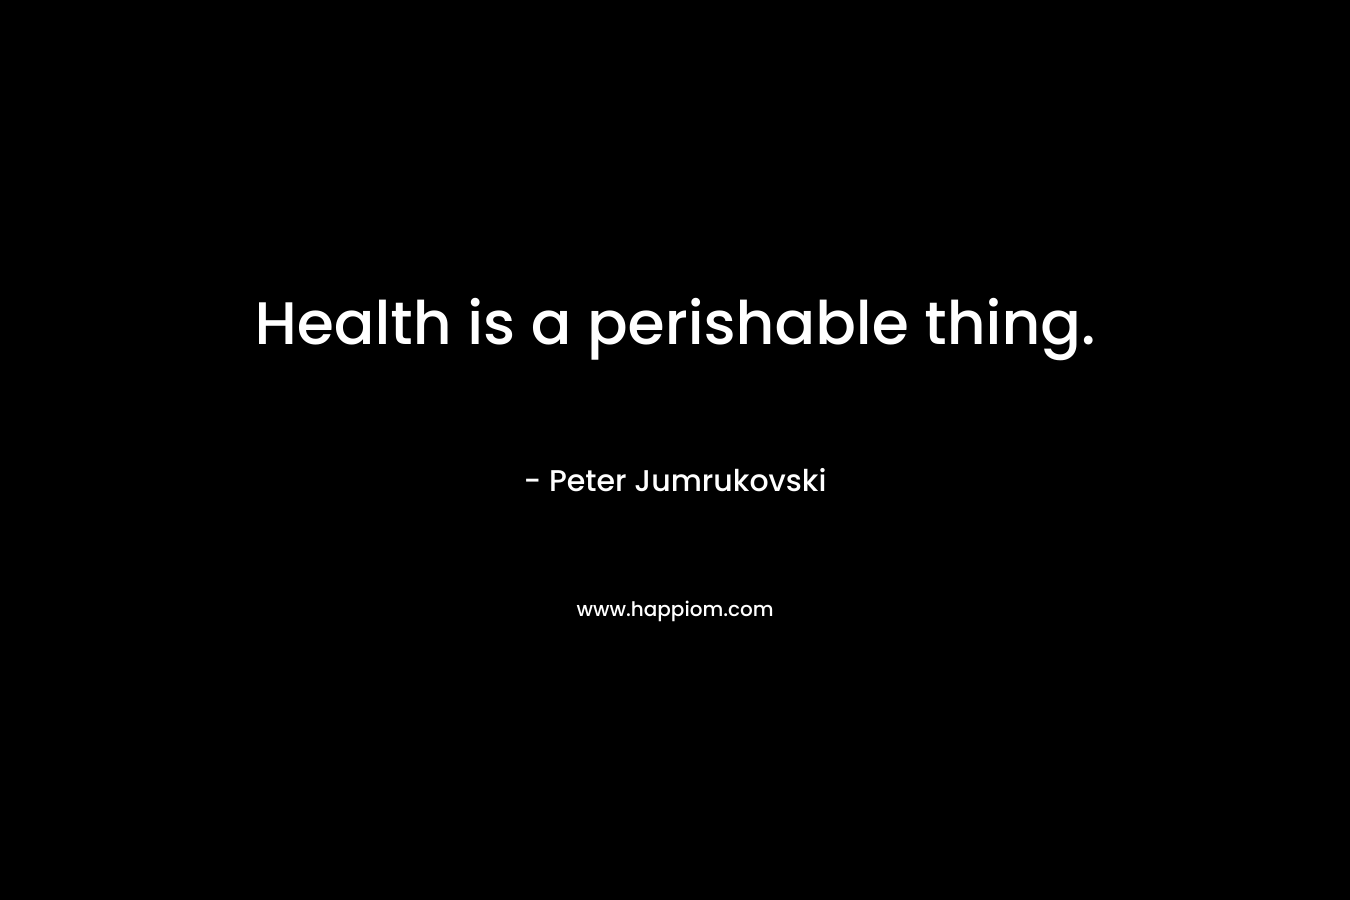 Health is a perishable thing.